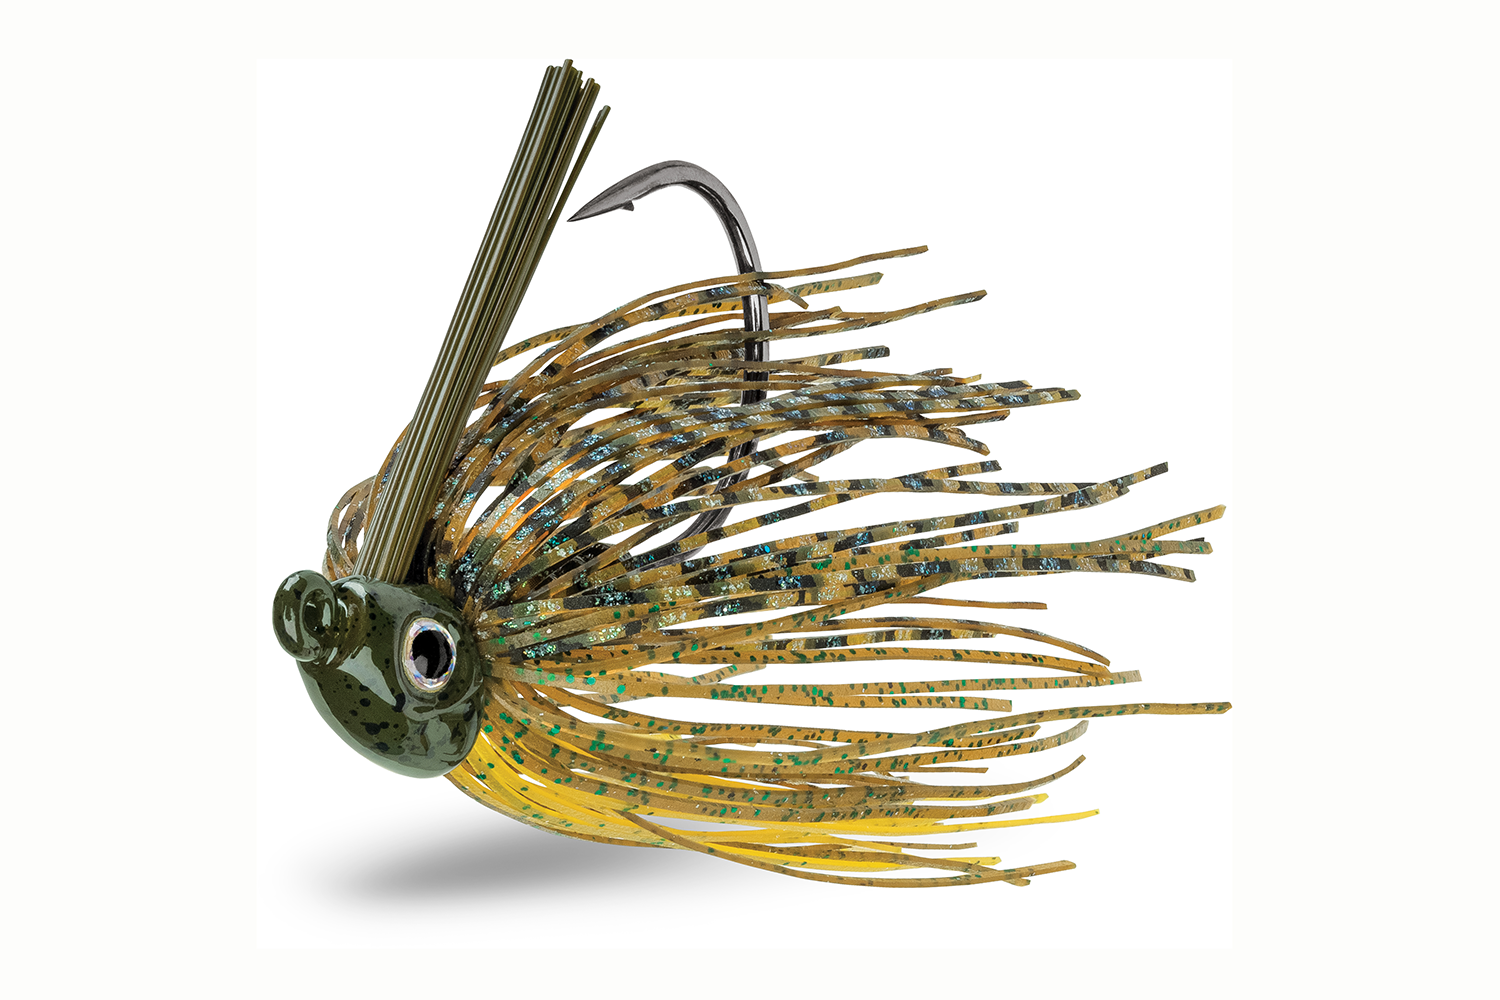 <p><b>Terminator HD Swim Jig </b></p>
<p>The HD Swim Jig features a hydrodynamic head, crafted to swim through the heaviest cover. It features an oversized 3D eye, premium banded silicone full skirt, VMC Hybrid 5/0 wide gap hook, tight grip trailer keeper and a nylon weed guard. Available in 12 colors and 2 sizes - 3/8 and 1/2 ounce. </p>
<p><a href=